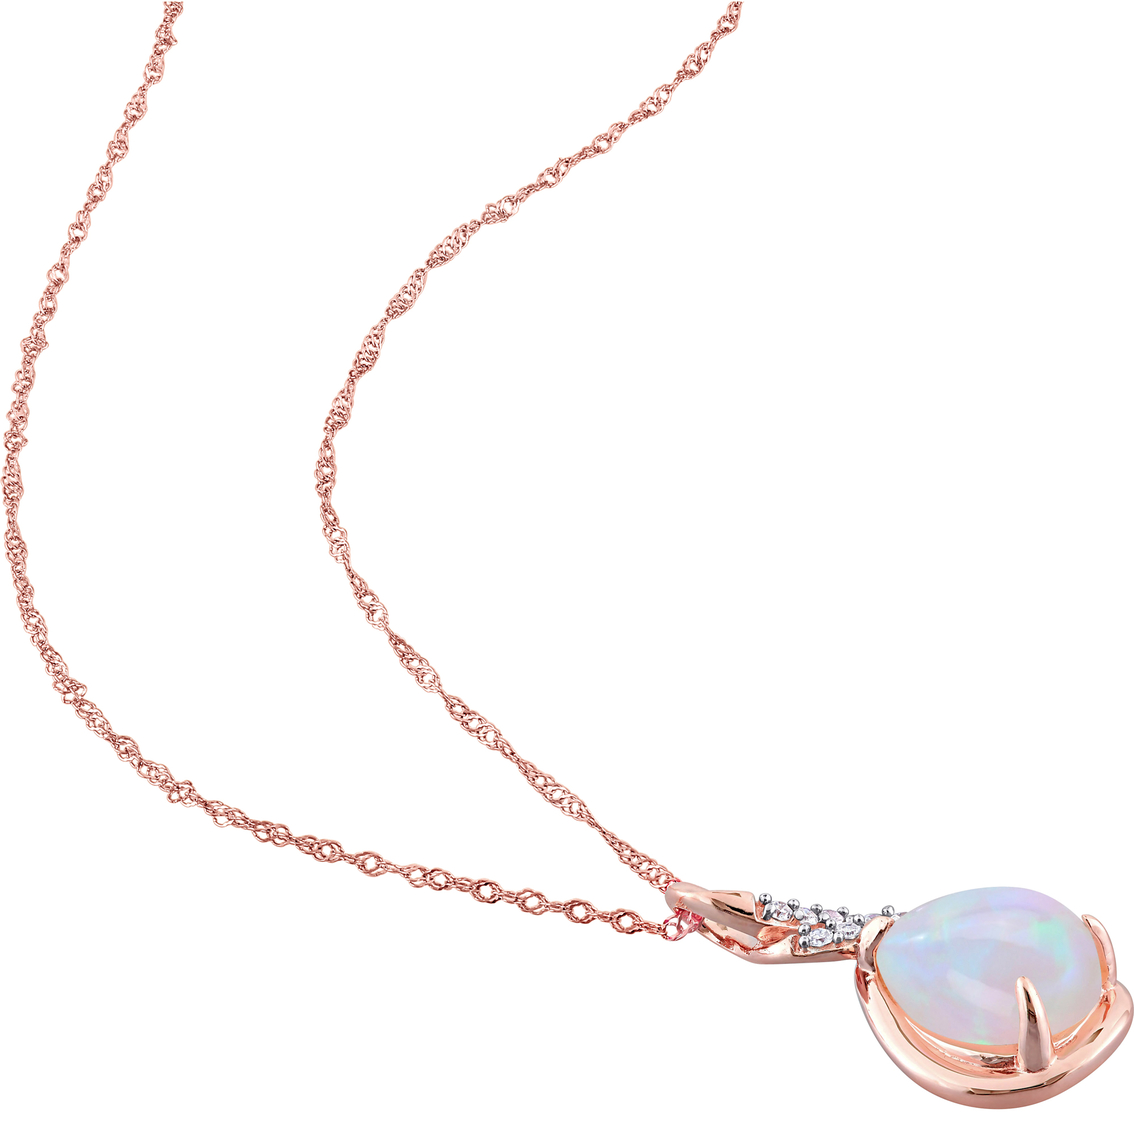 Sofia B. 10K Rose Gold 2 CTW Opal and Diamond Accent Twist Pendant with Chain - Image 2 of 3